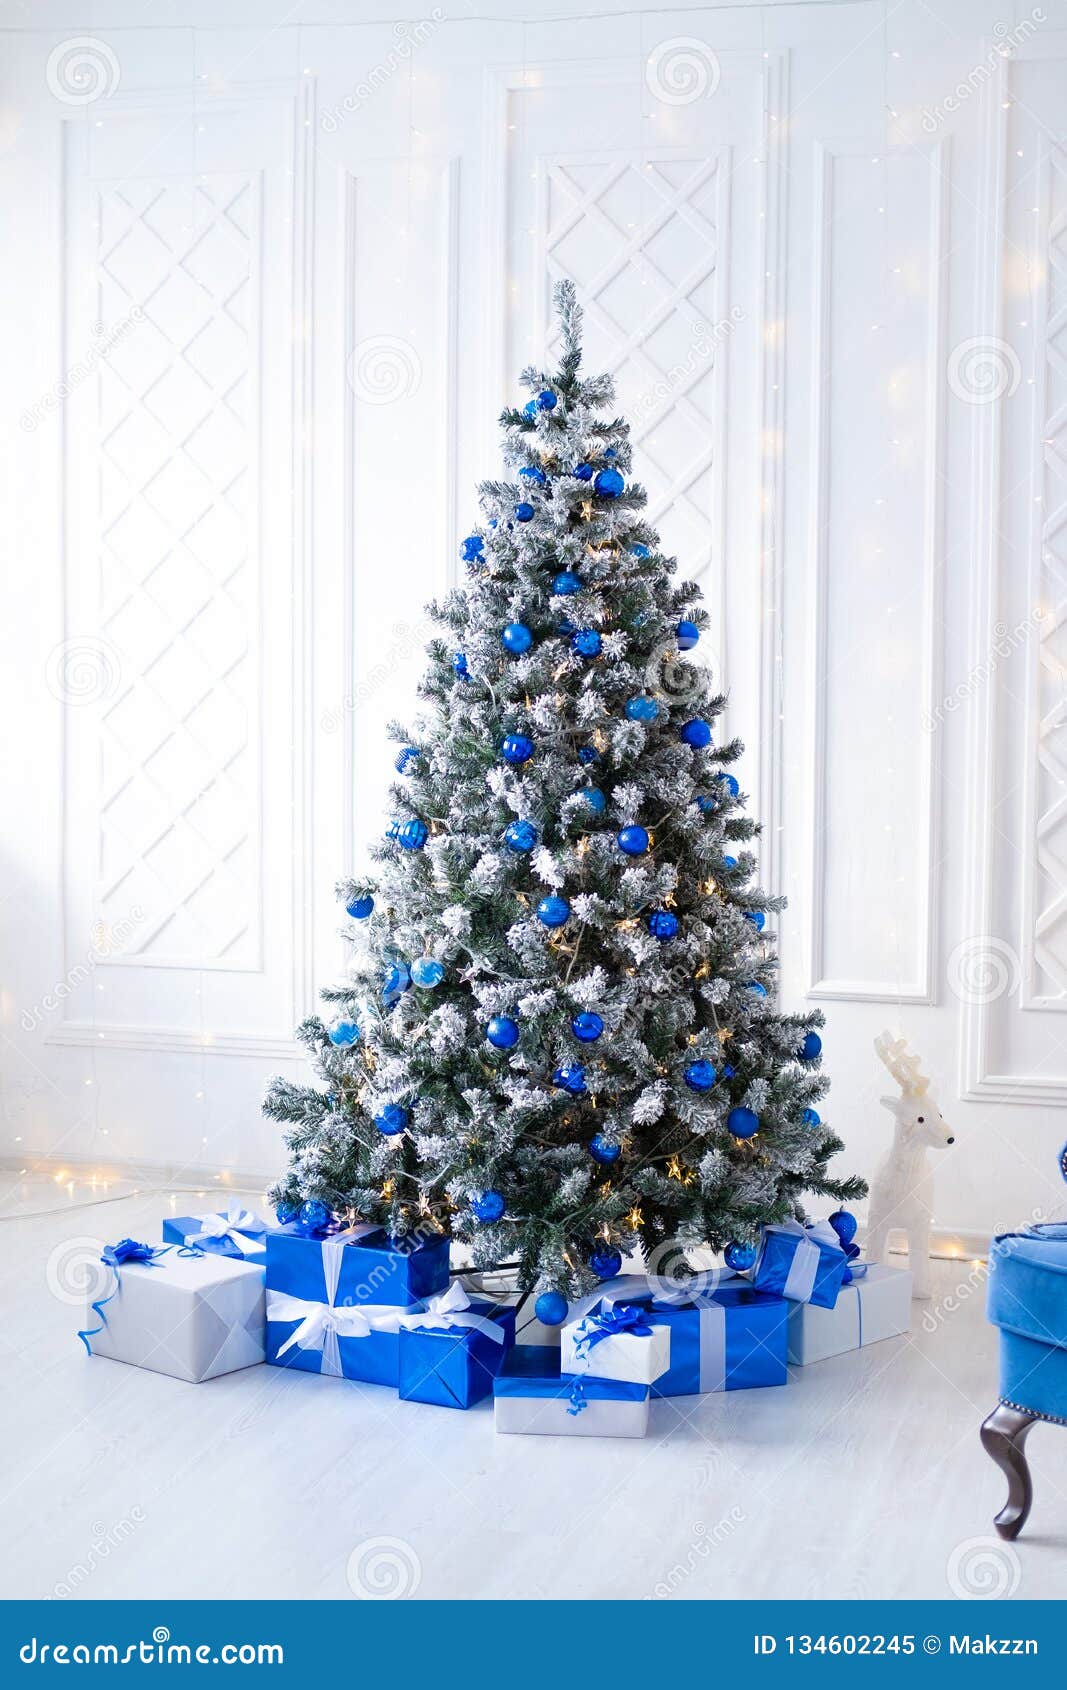 White Christmas Tree on White, Decorated with Blue Ornaments and ...